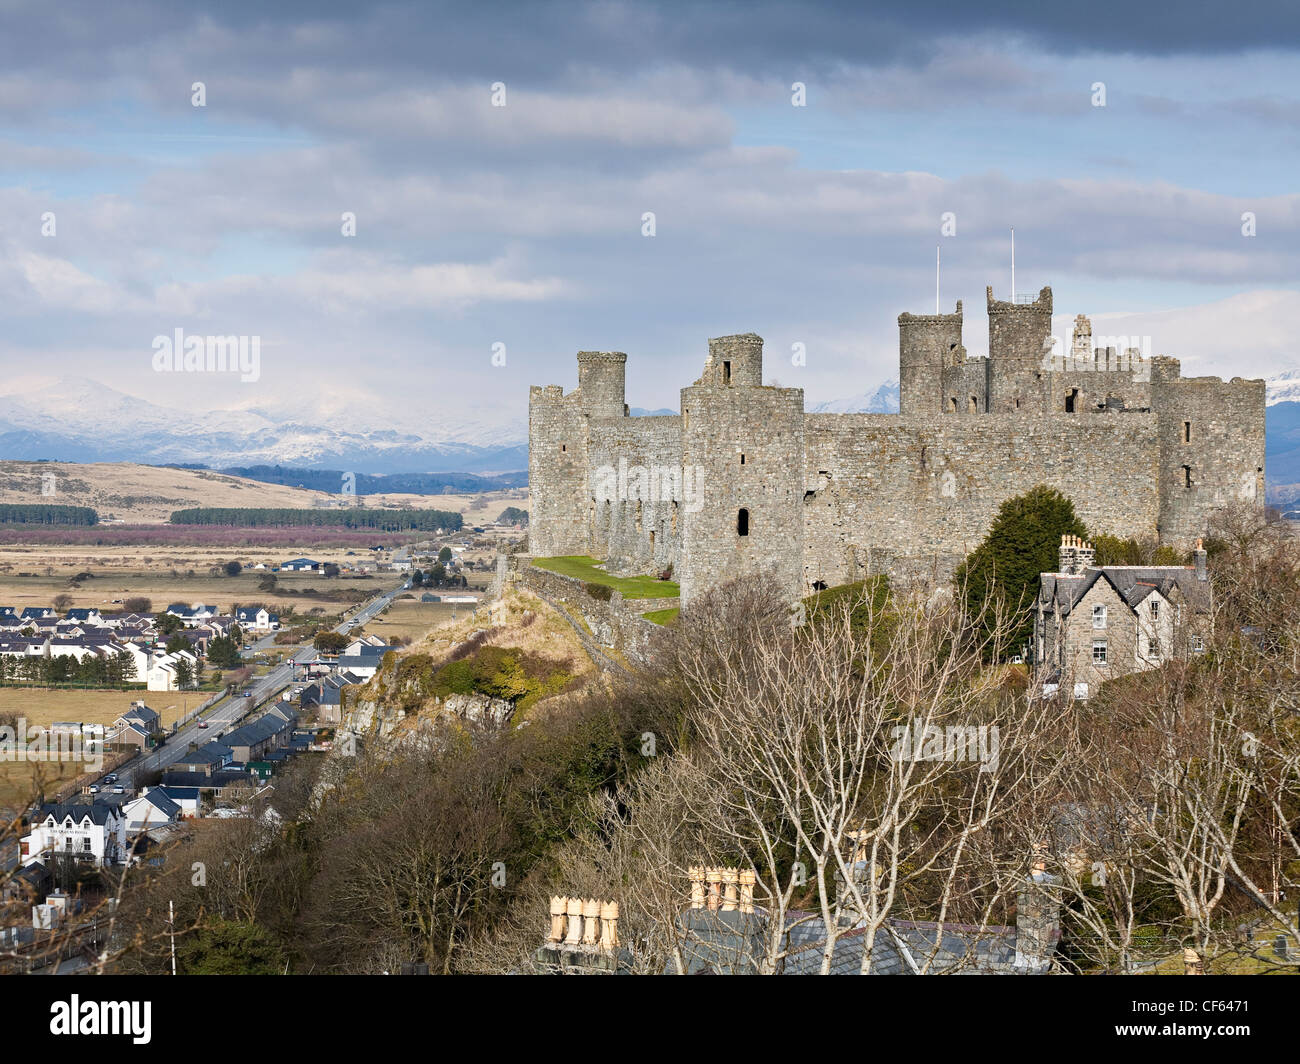 Harlech Castle built in 1283 by Edward I as one of the most formidable of his 'iron ring' of fortresses. Stock Photo